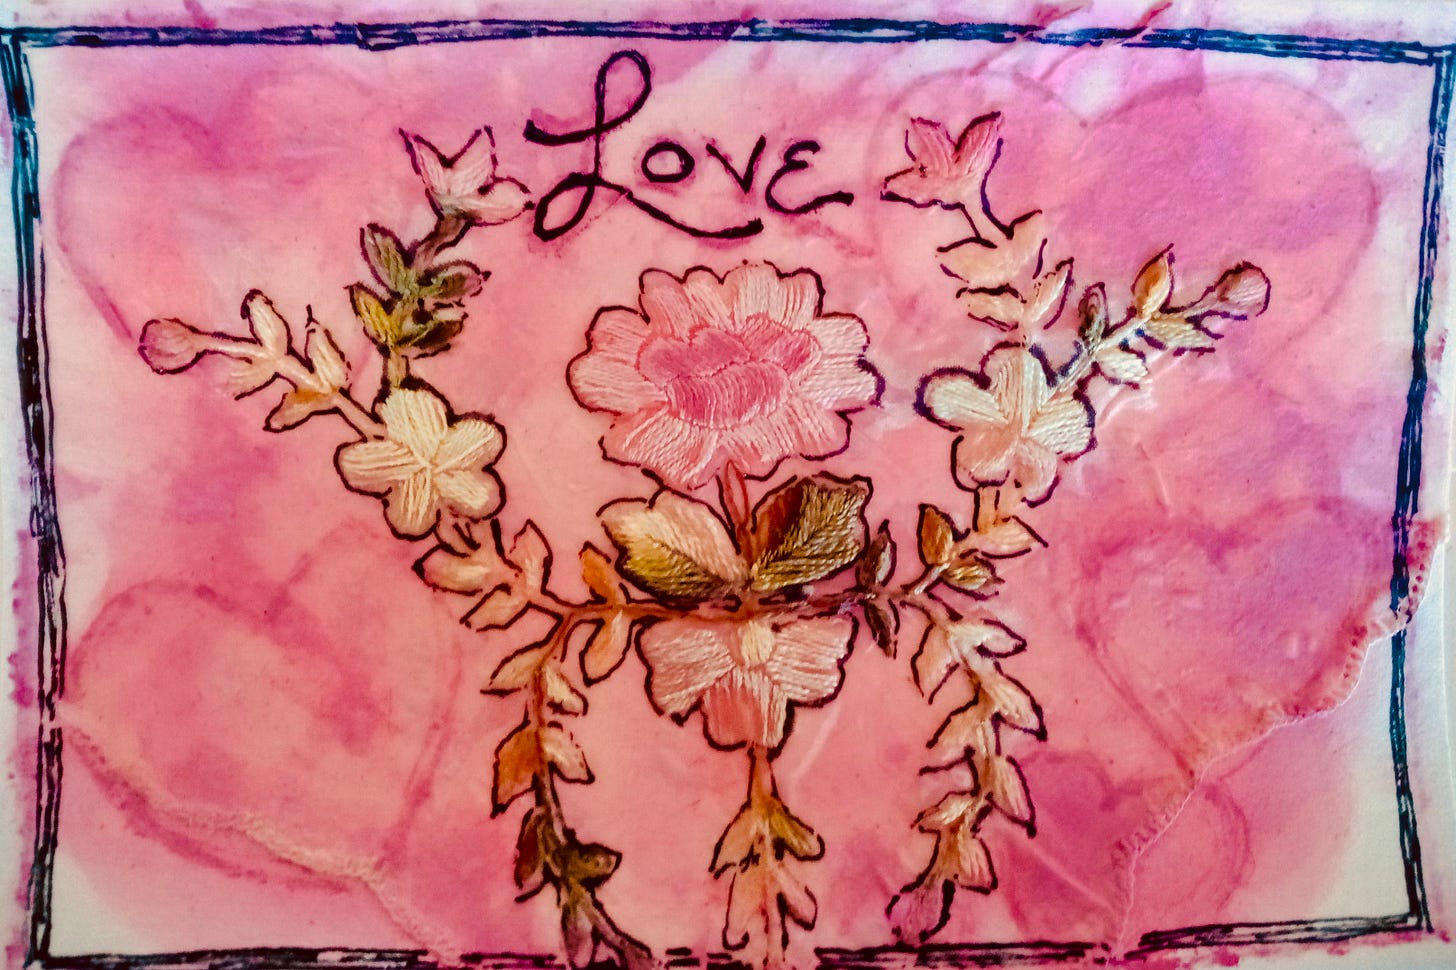 Valentine of pink painted hearts, embroidered flowers, and text "LOVE" at the top